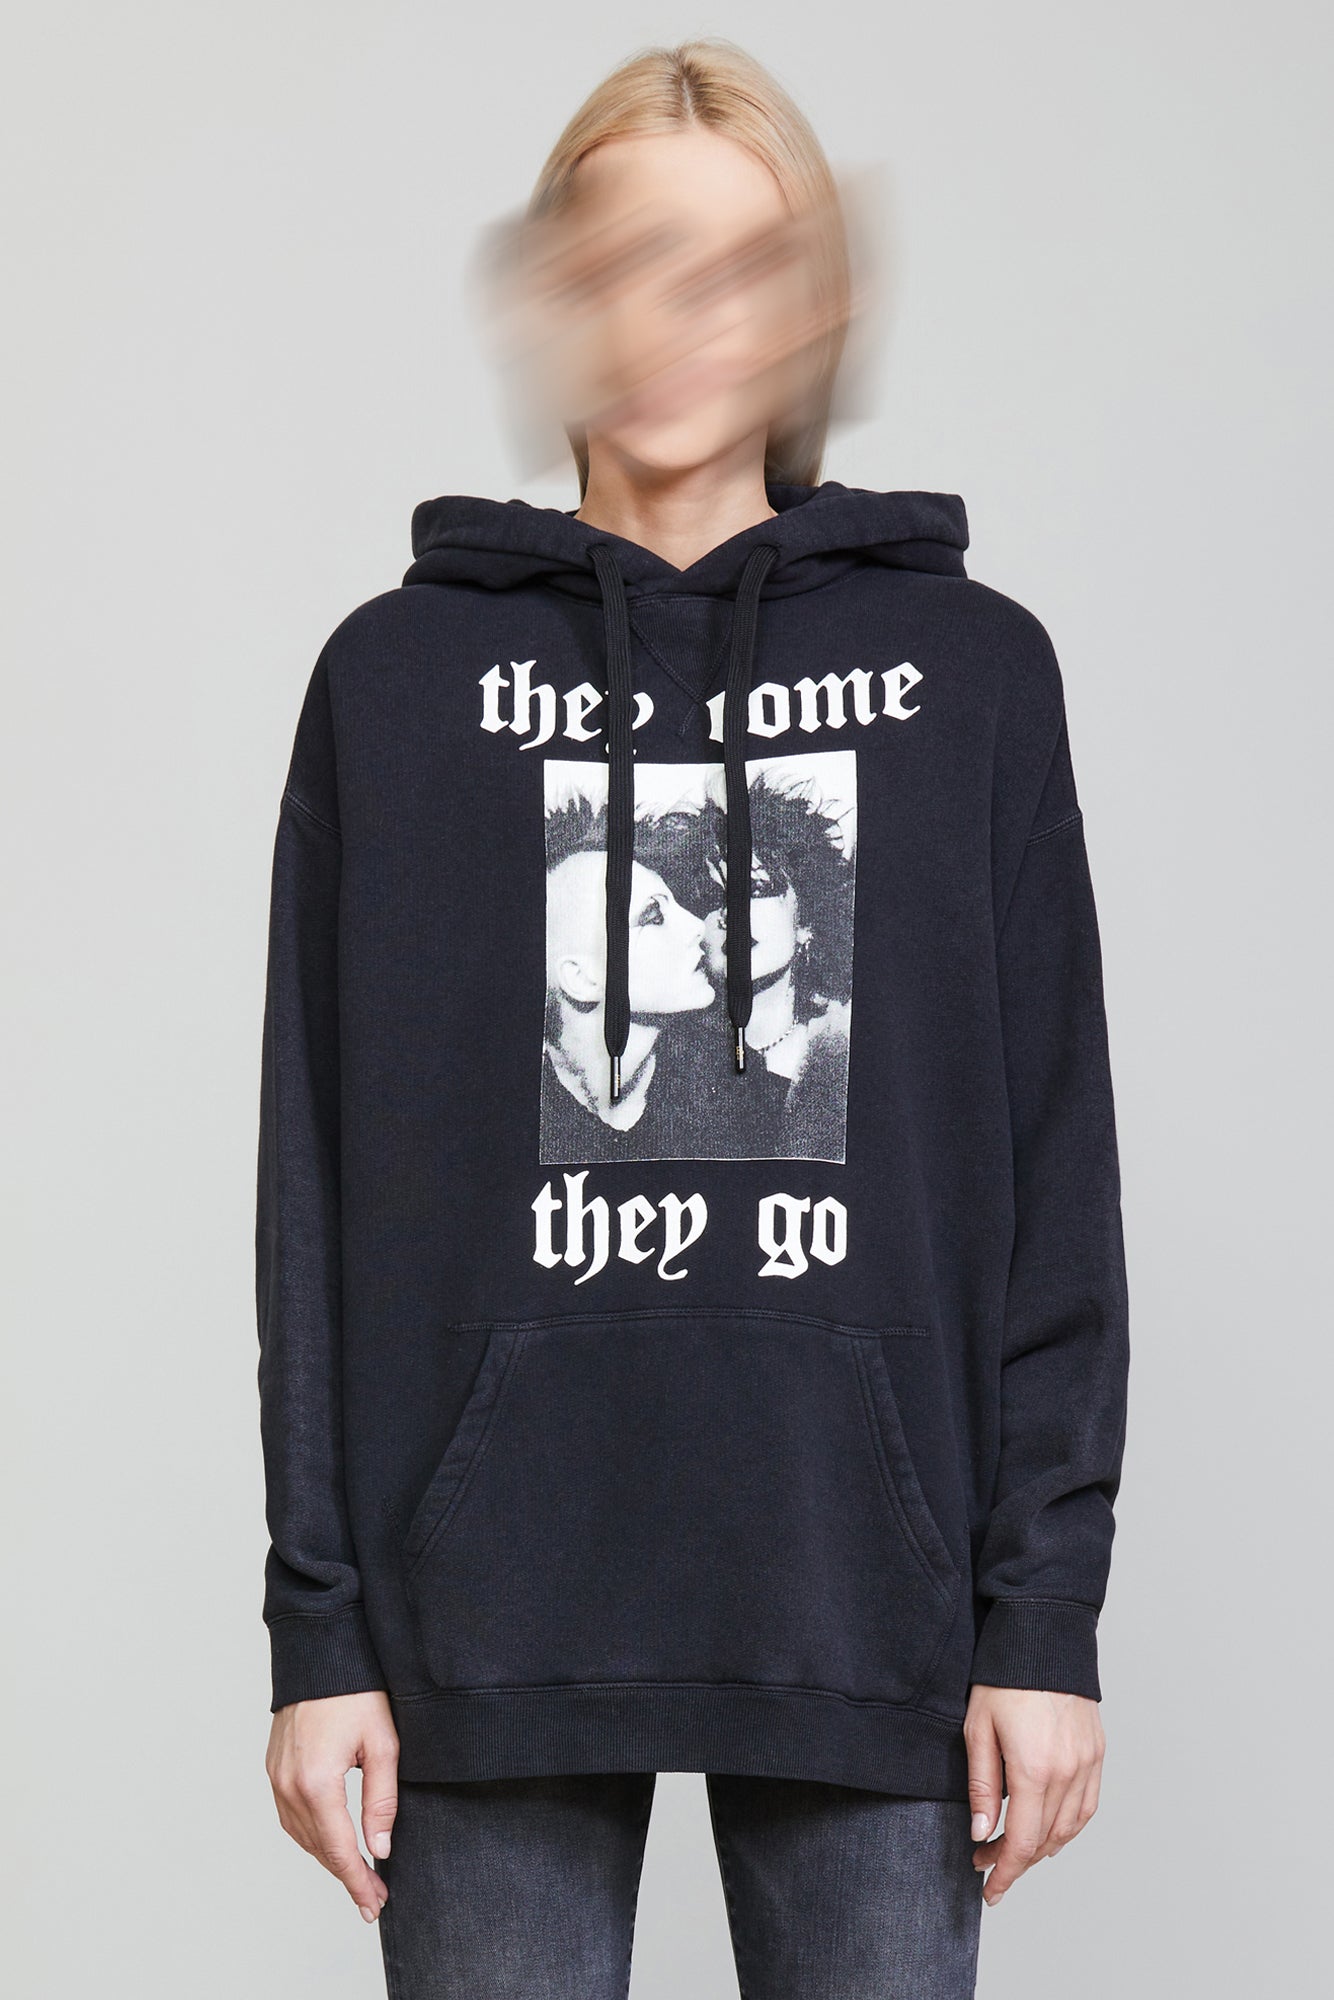 THEY COME THEY GO R13 HOODIE - Boutique77